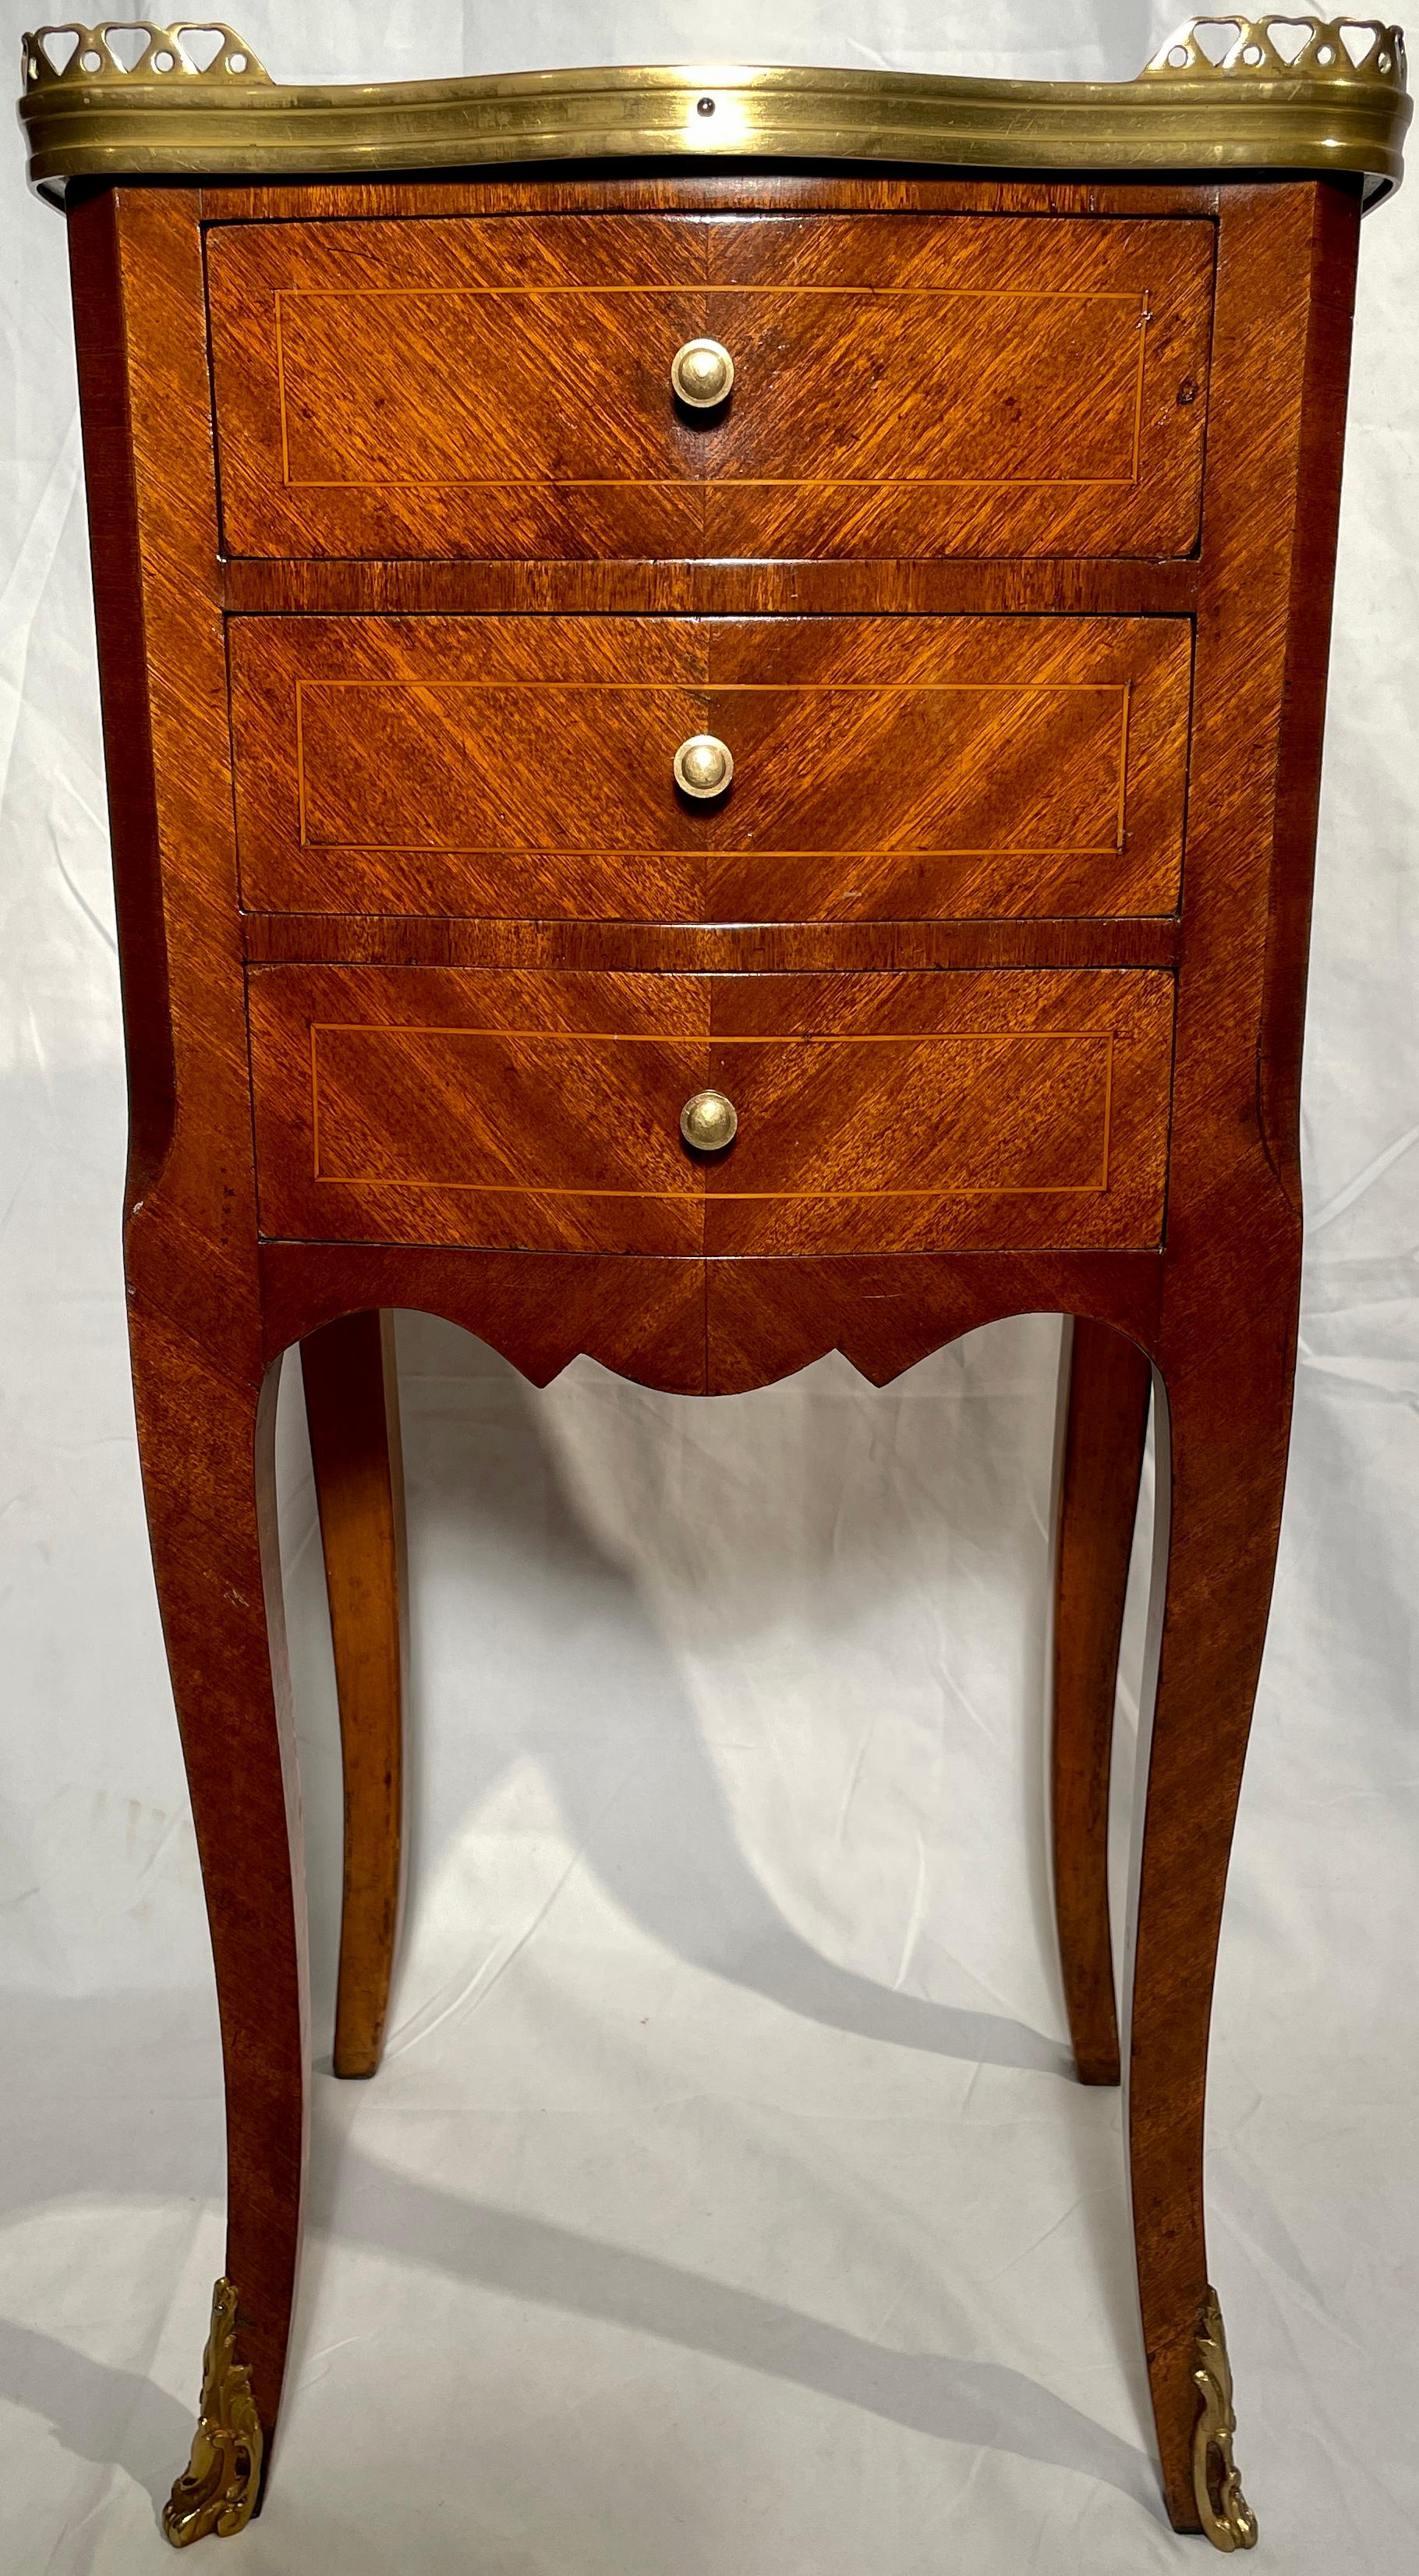 Pair antique French inlaid mahogany galleried-top bedside tables, circa 1900.